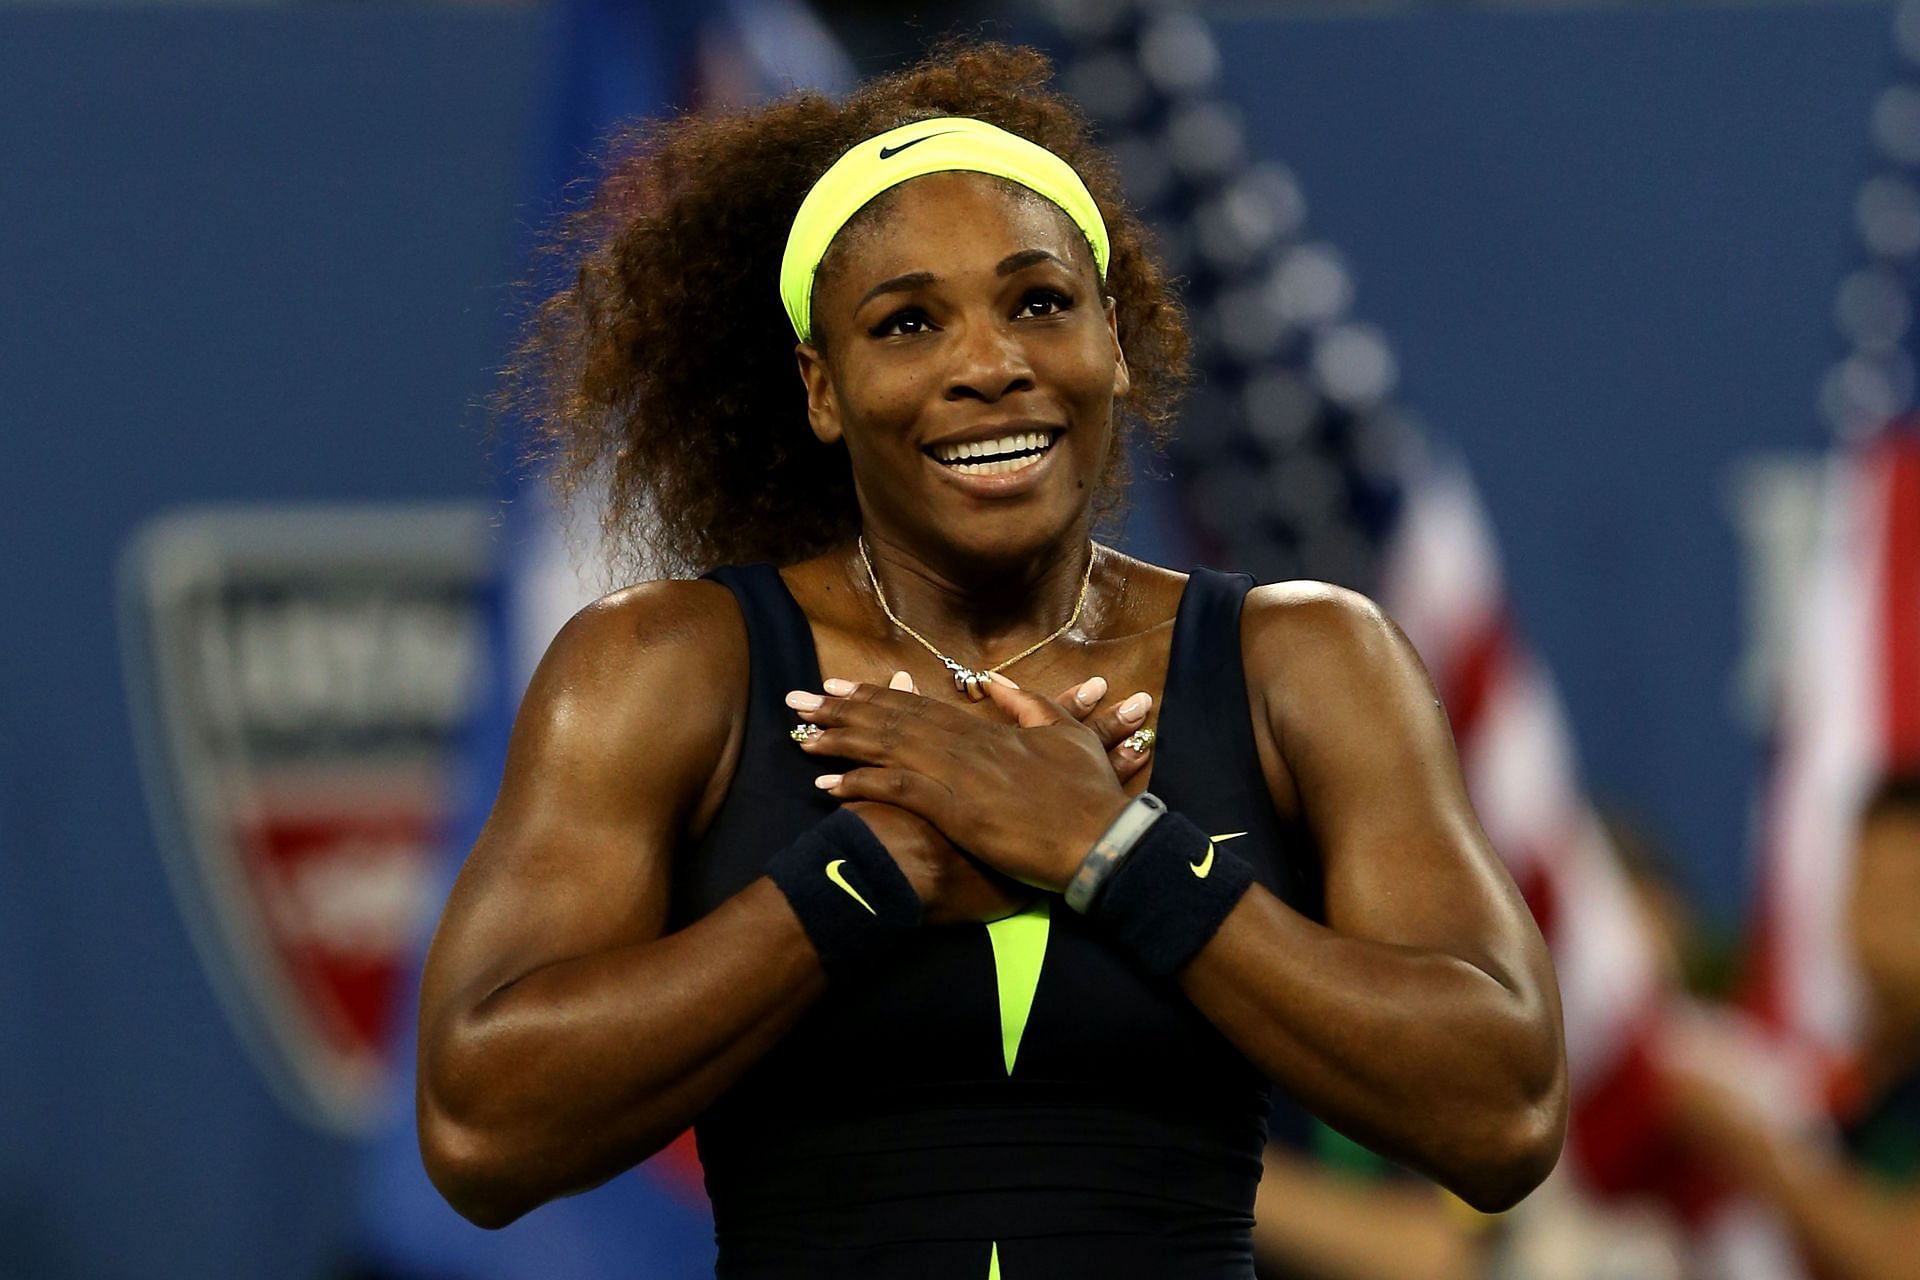 Serena Williams at the 2012 US Open - Getty Images